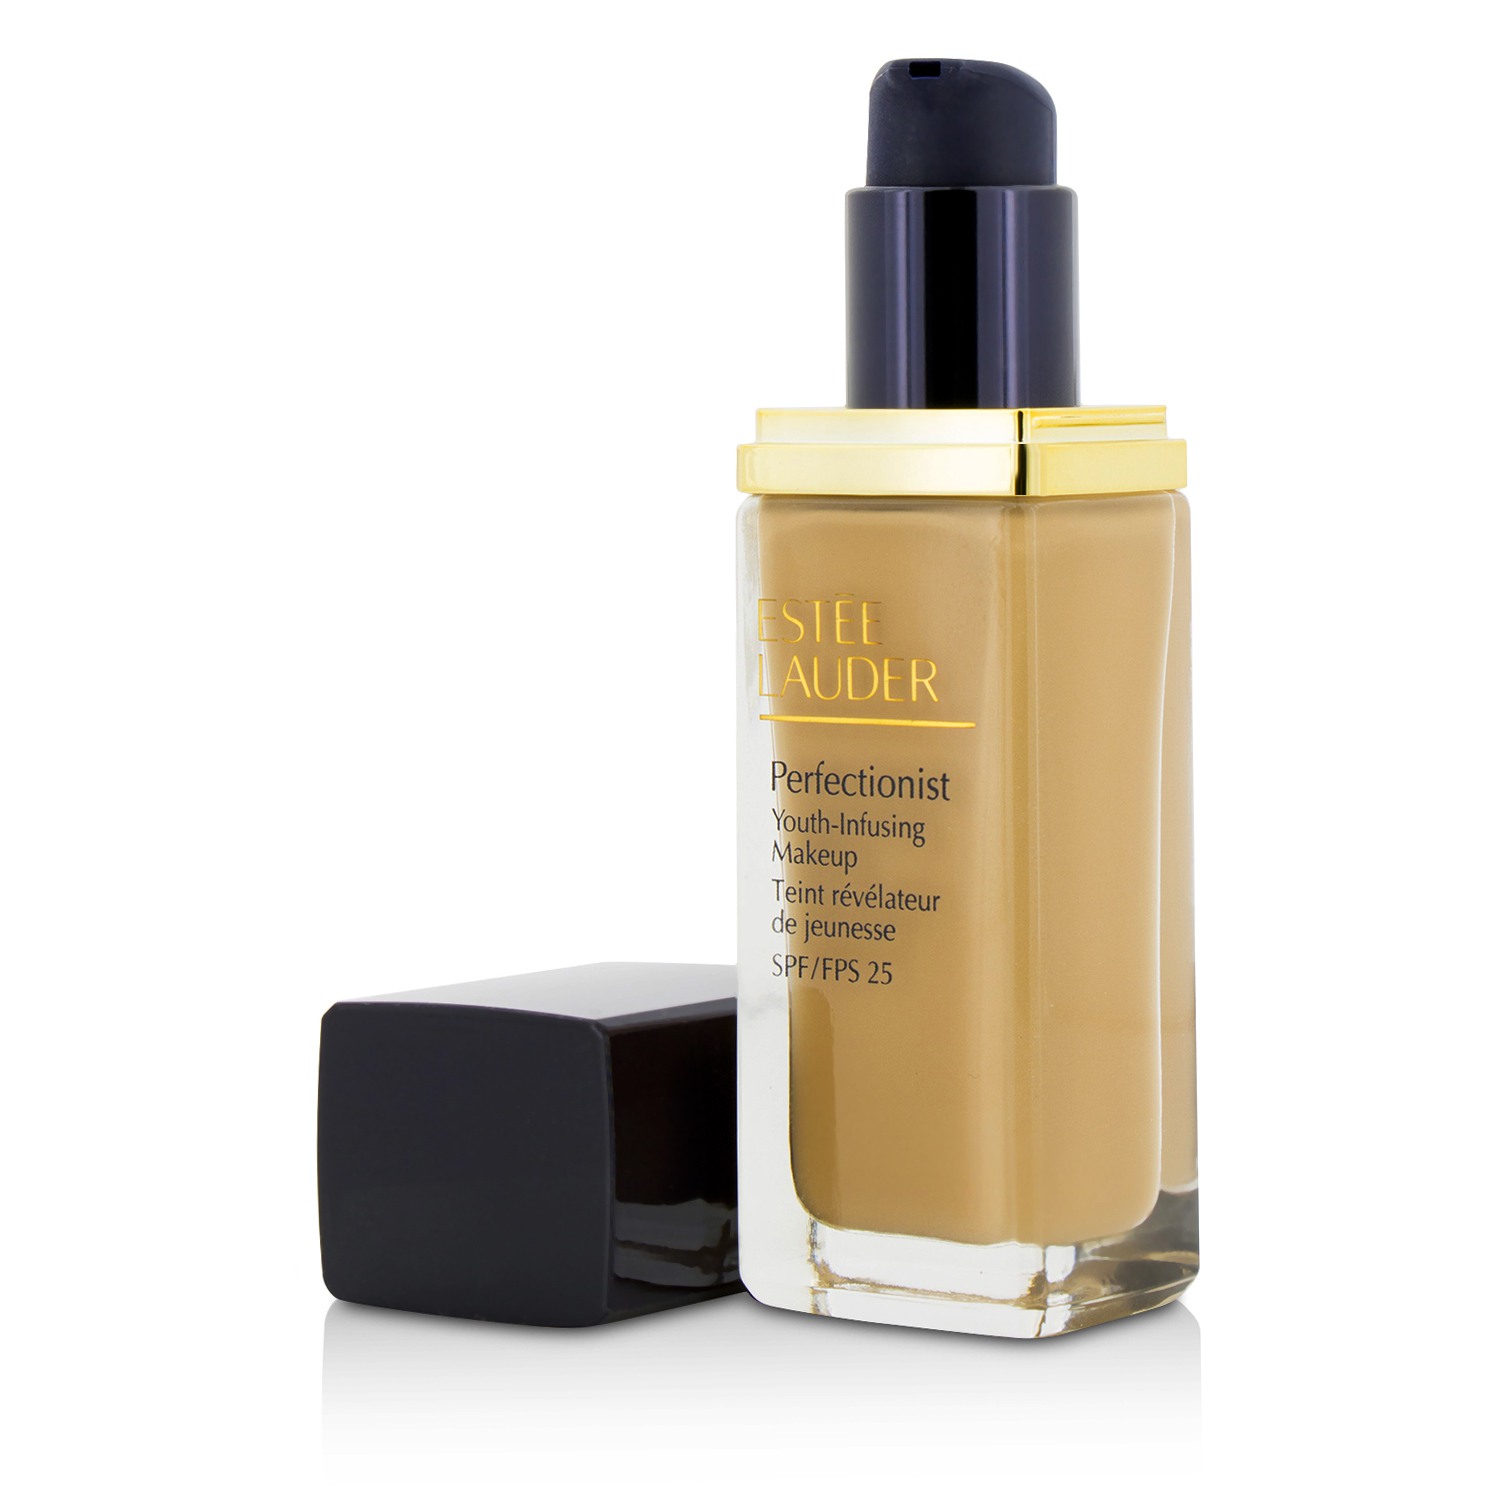 Estee Lauder Perfectionist Youth-Infusing Serum Makeup SPF 